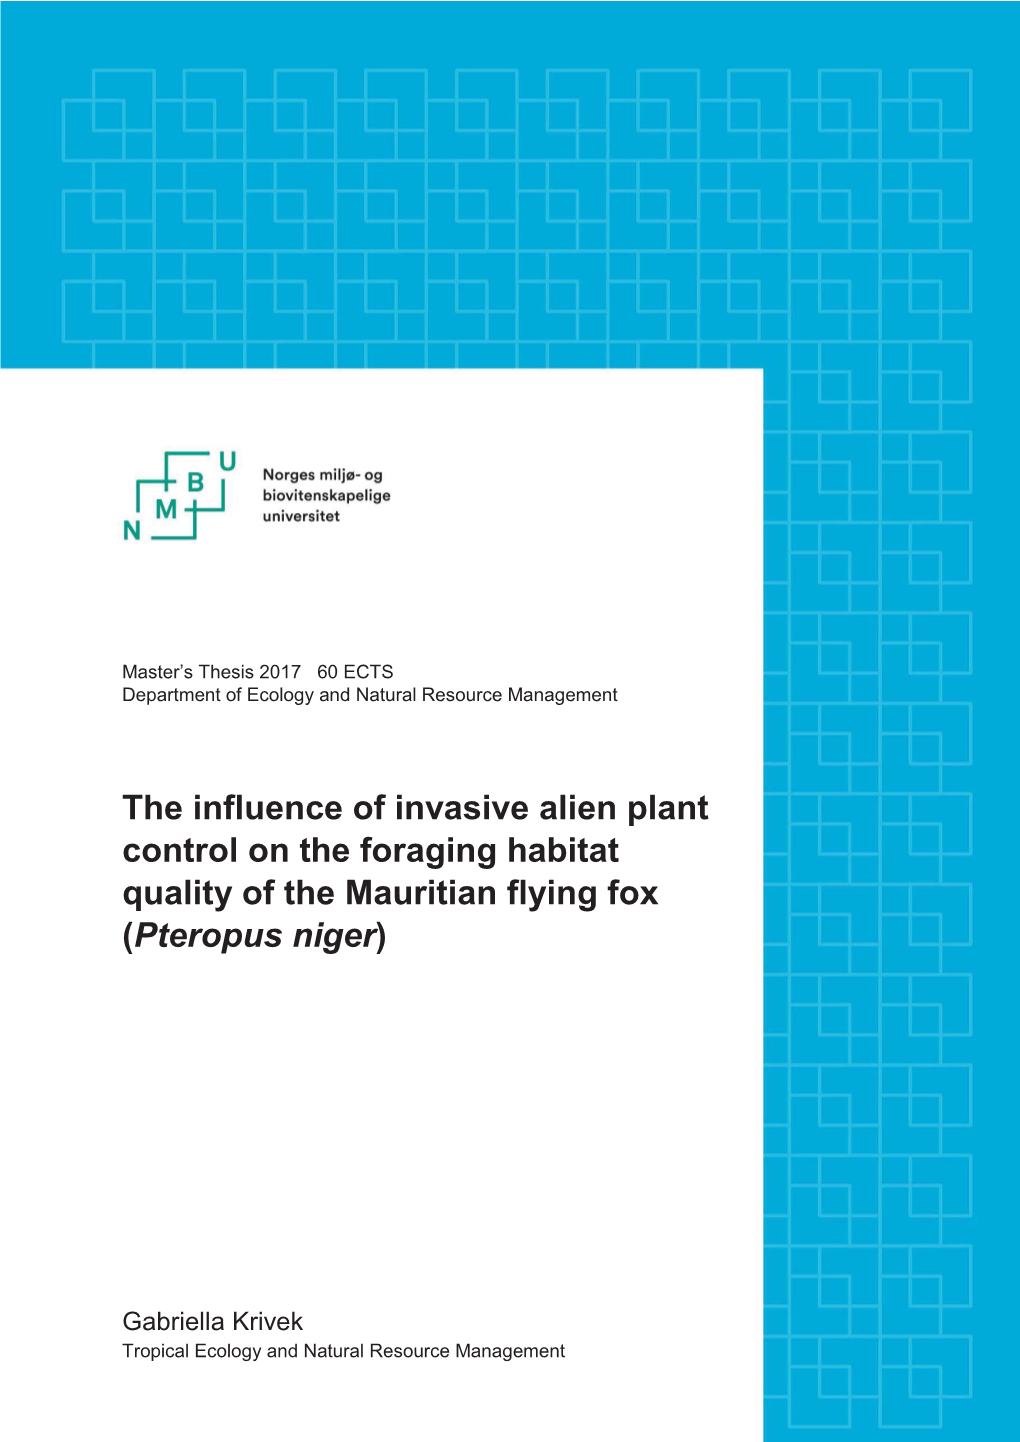 The Influence of Invasive Alien Plant Control on the Foraging Habitat Quality of the Mauritian Flying Fox (Pteropus Niger)